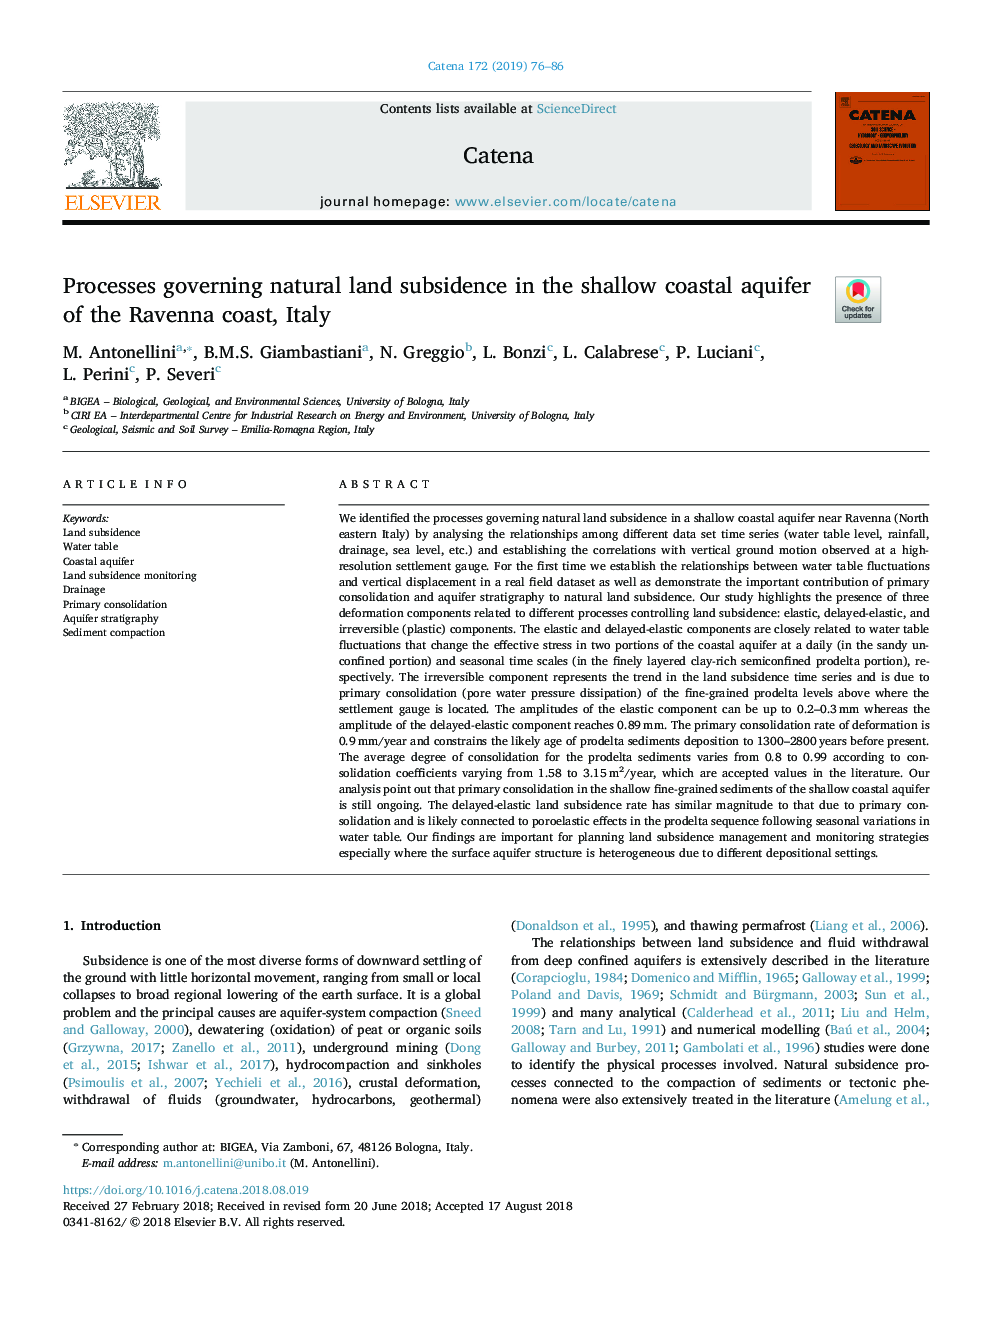 Processes governing natural land subsidence in the shallow coastal aquifer of the Ravenna coast, Italy